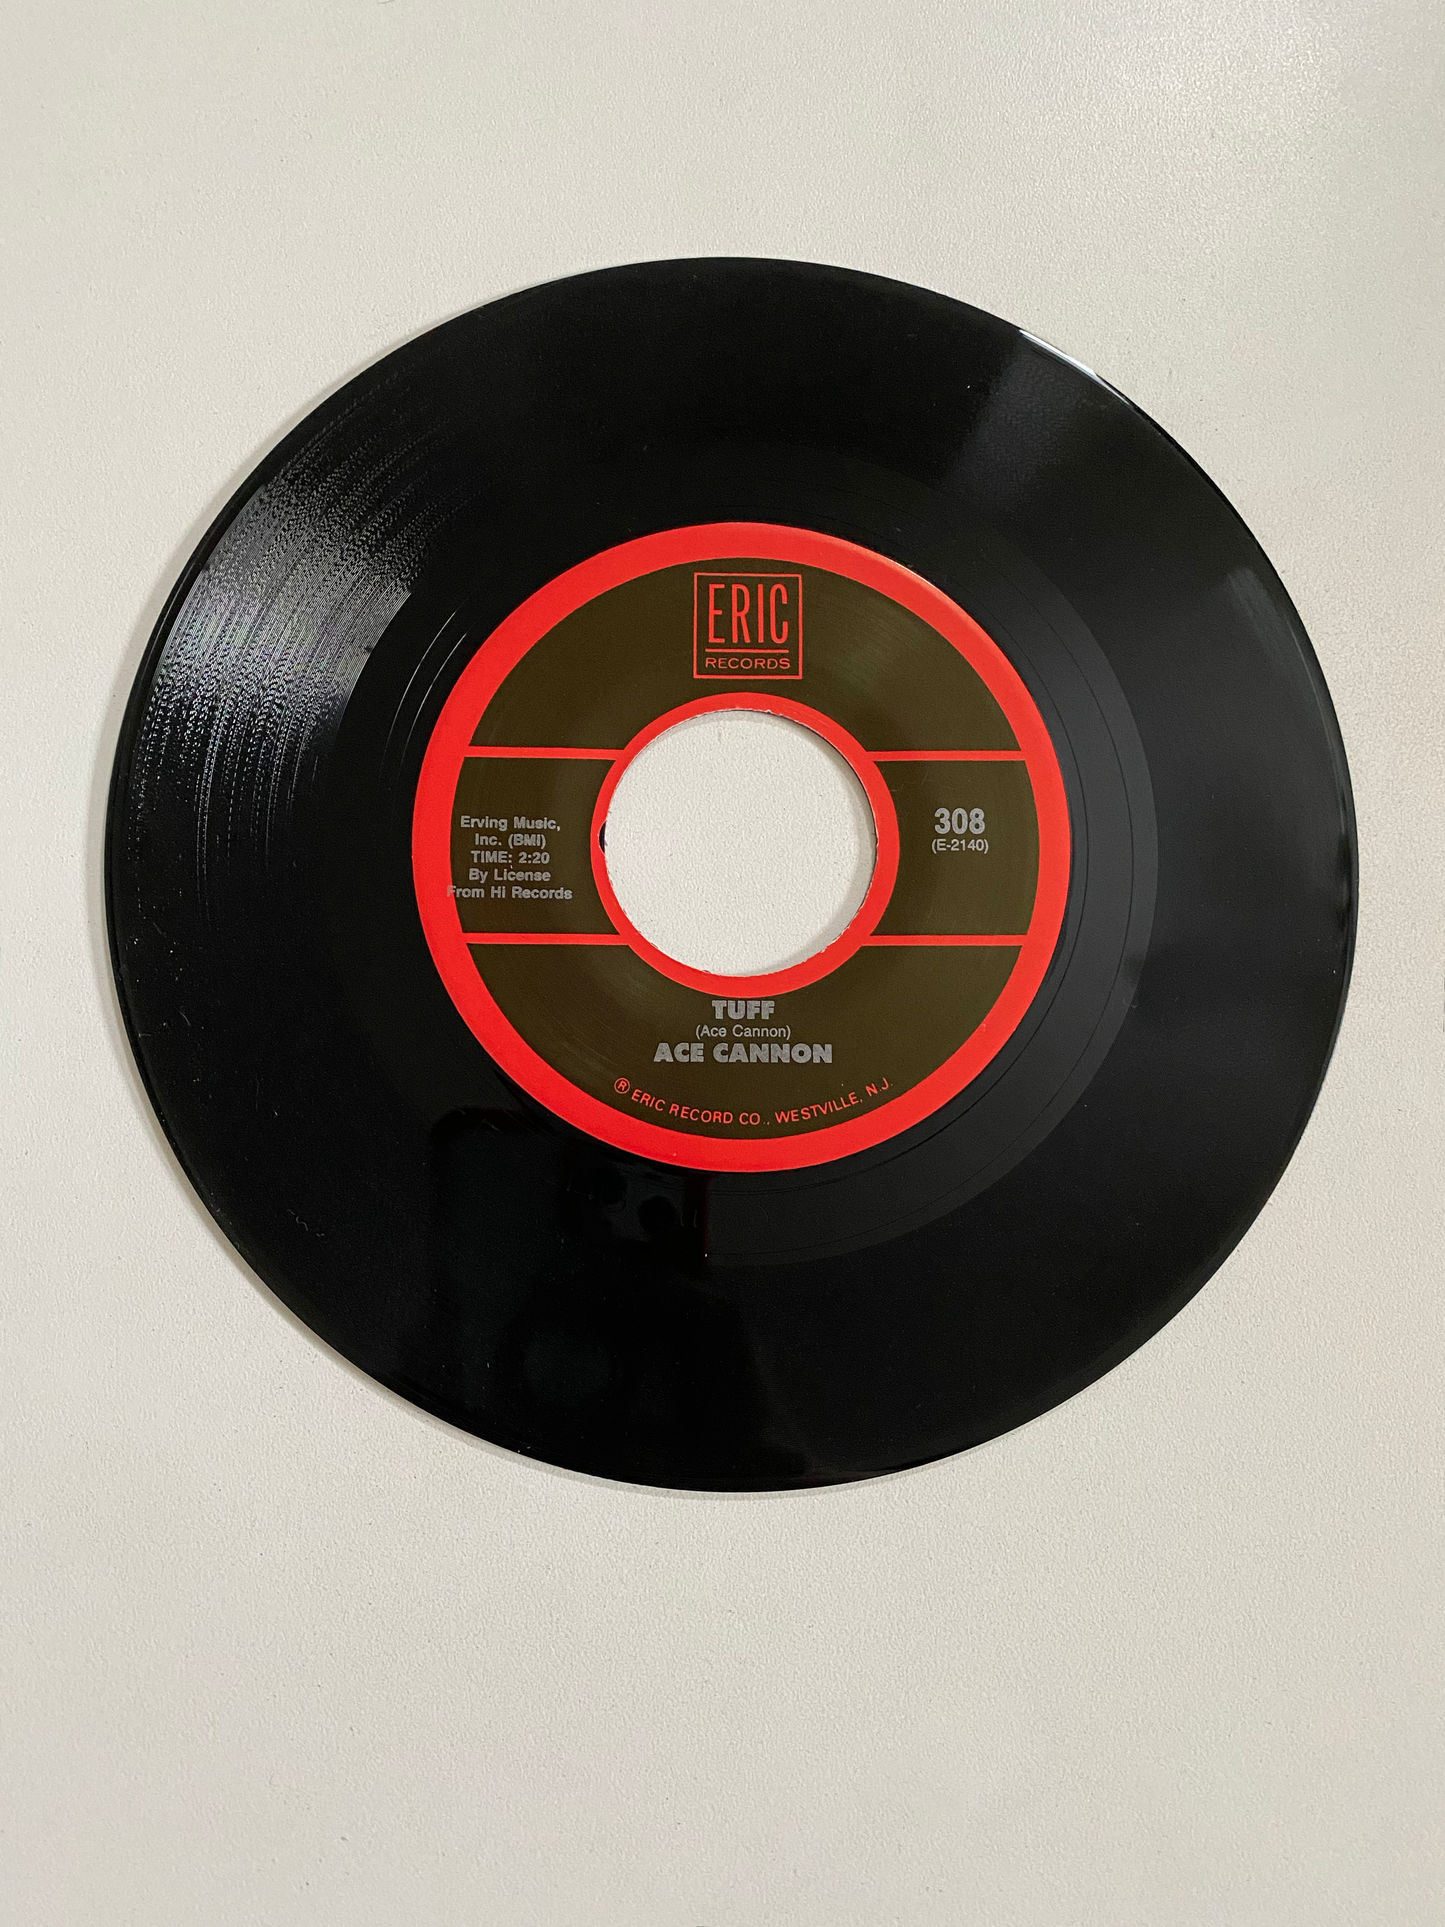 Jumpin' Gene Simmons - Haunted House | 45 The Vintedge Co.